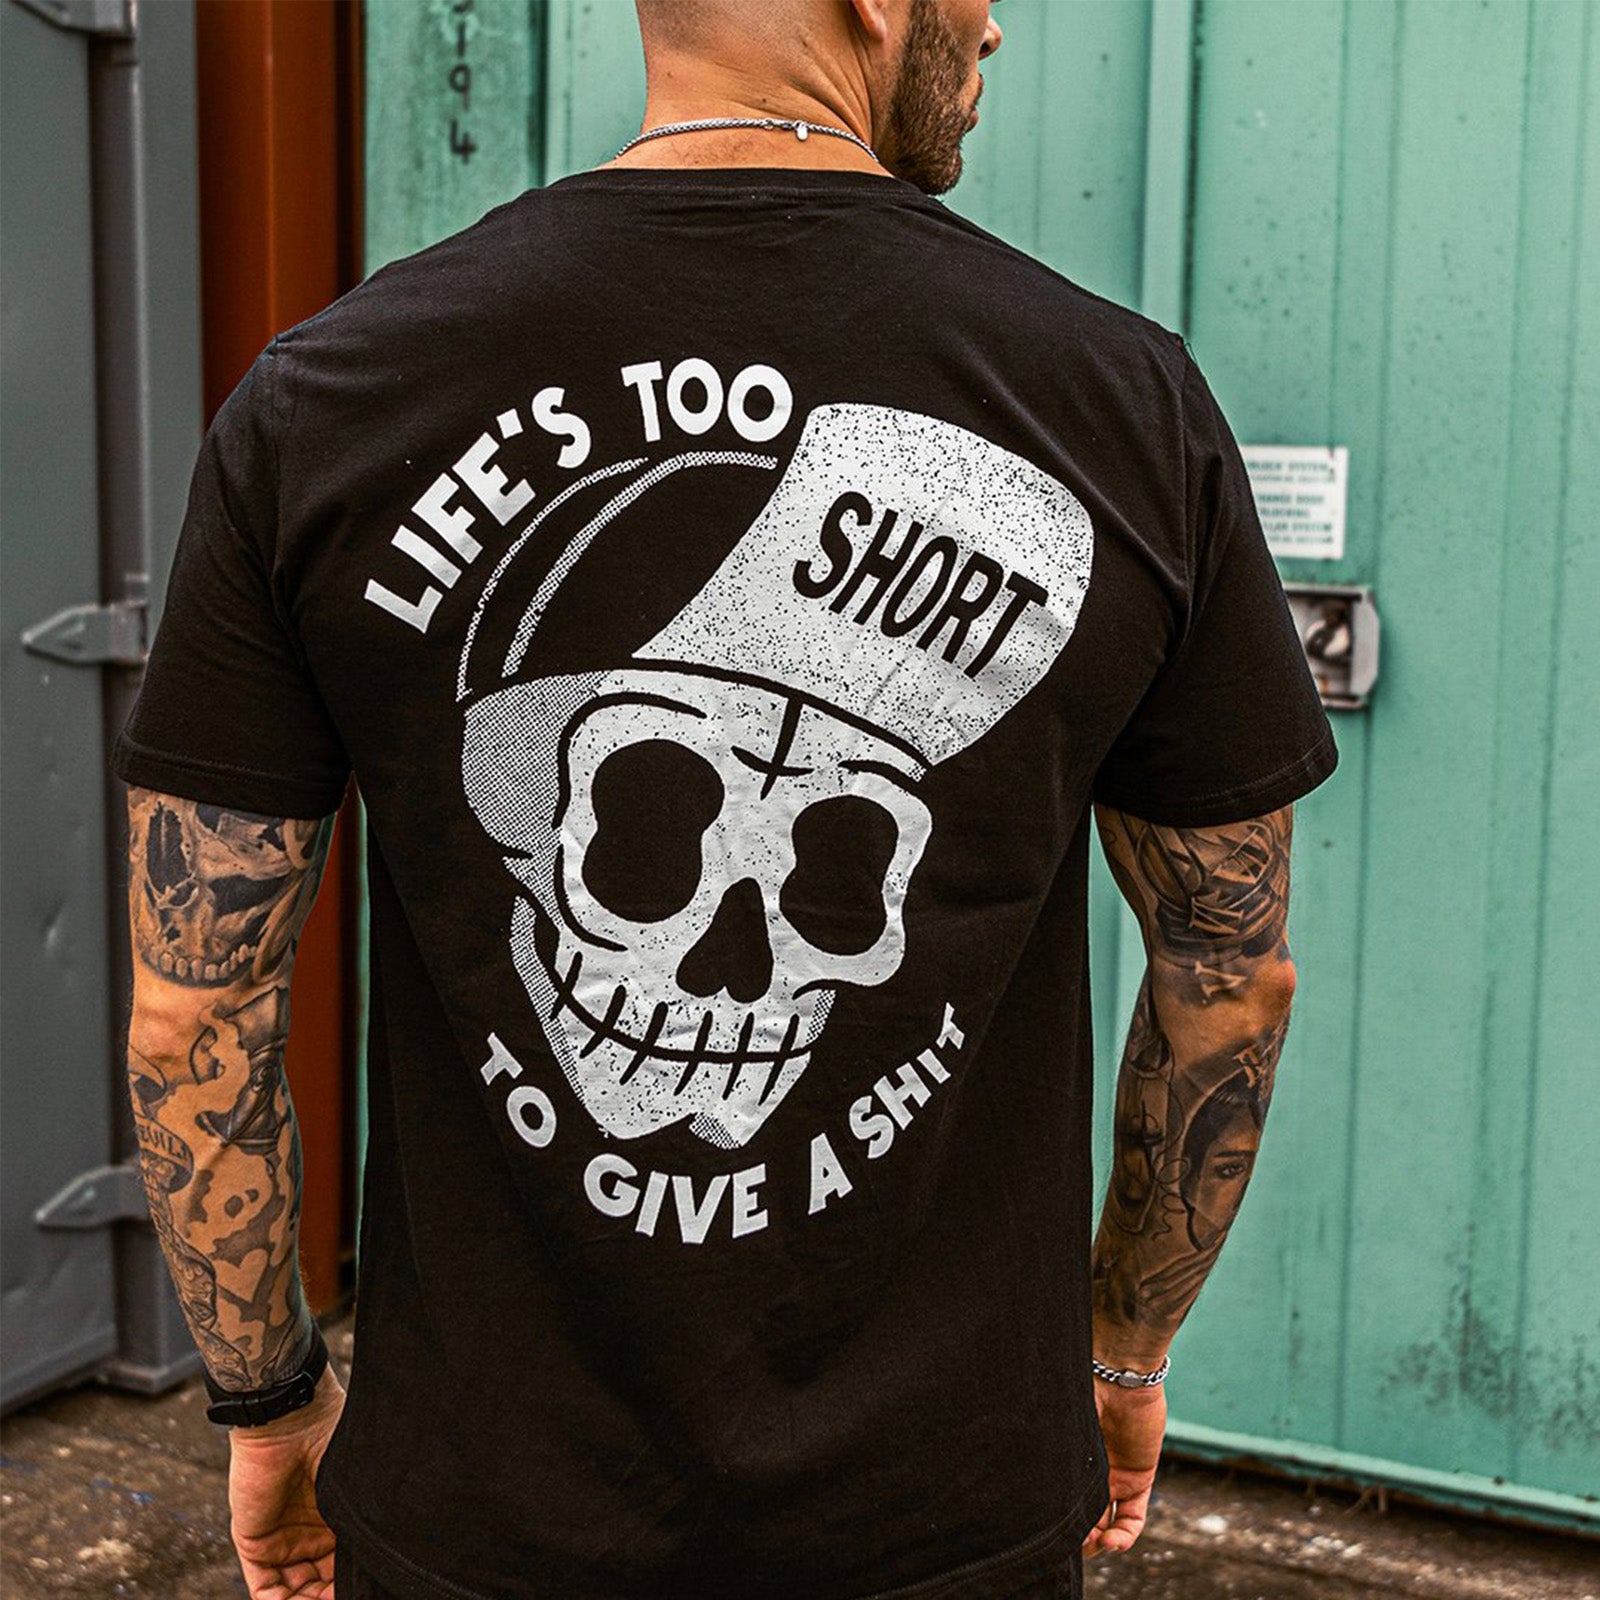 Uprandy Life Too Short To Give A Shit Skull Printed Men Casual T-Shirt - chicyea